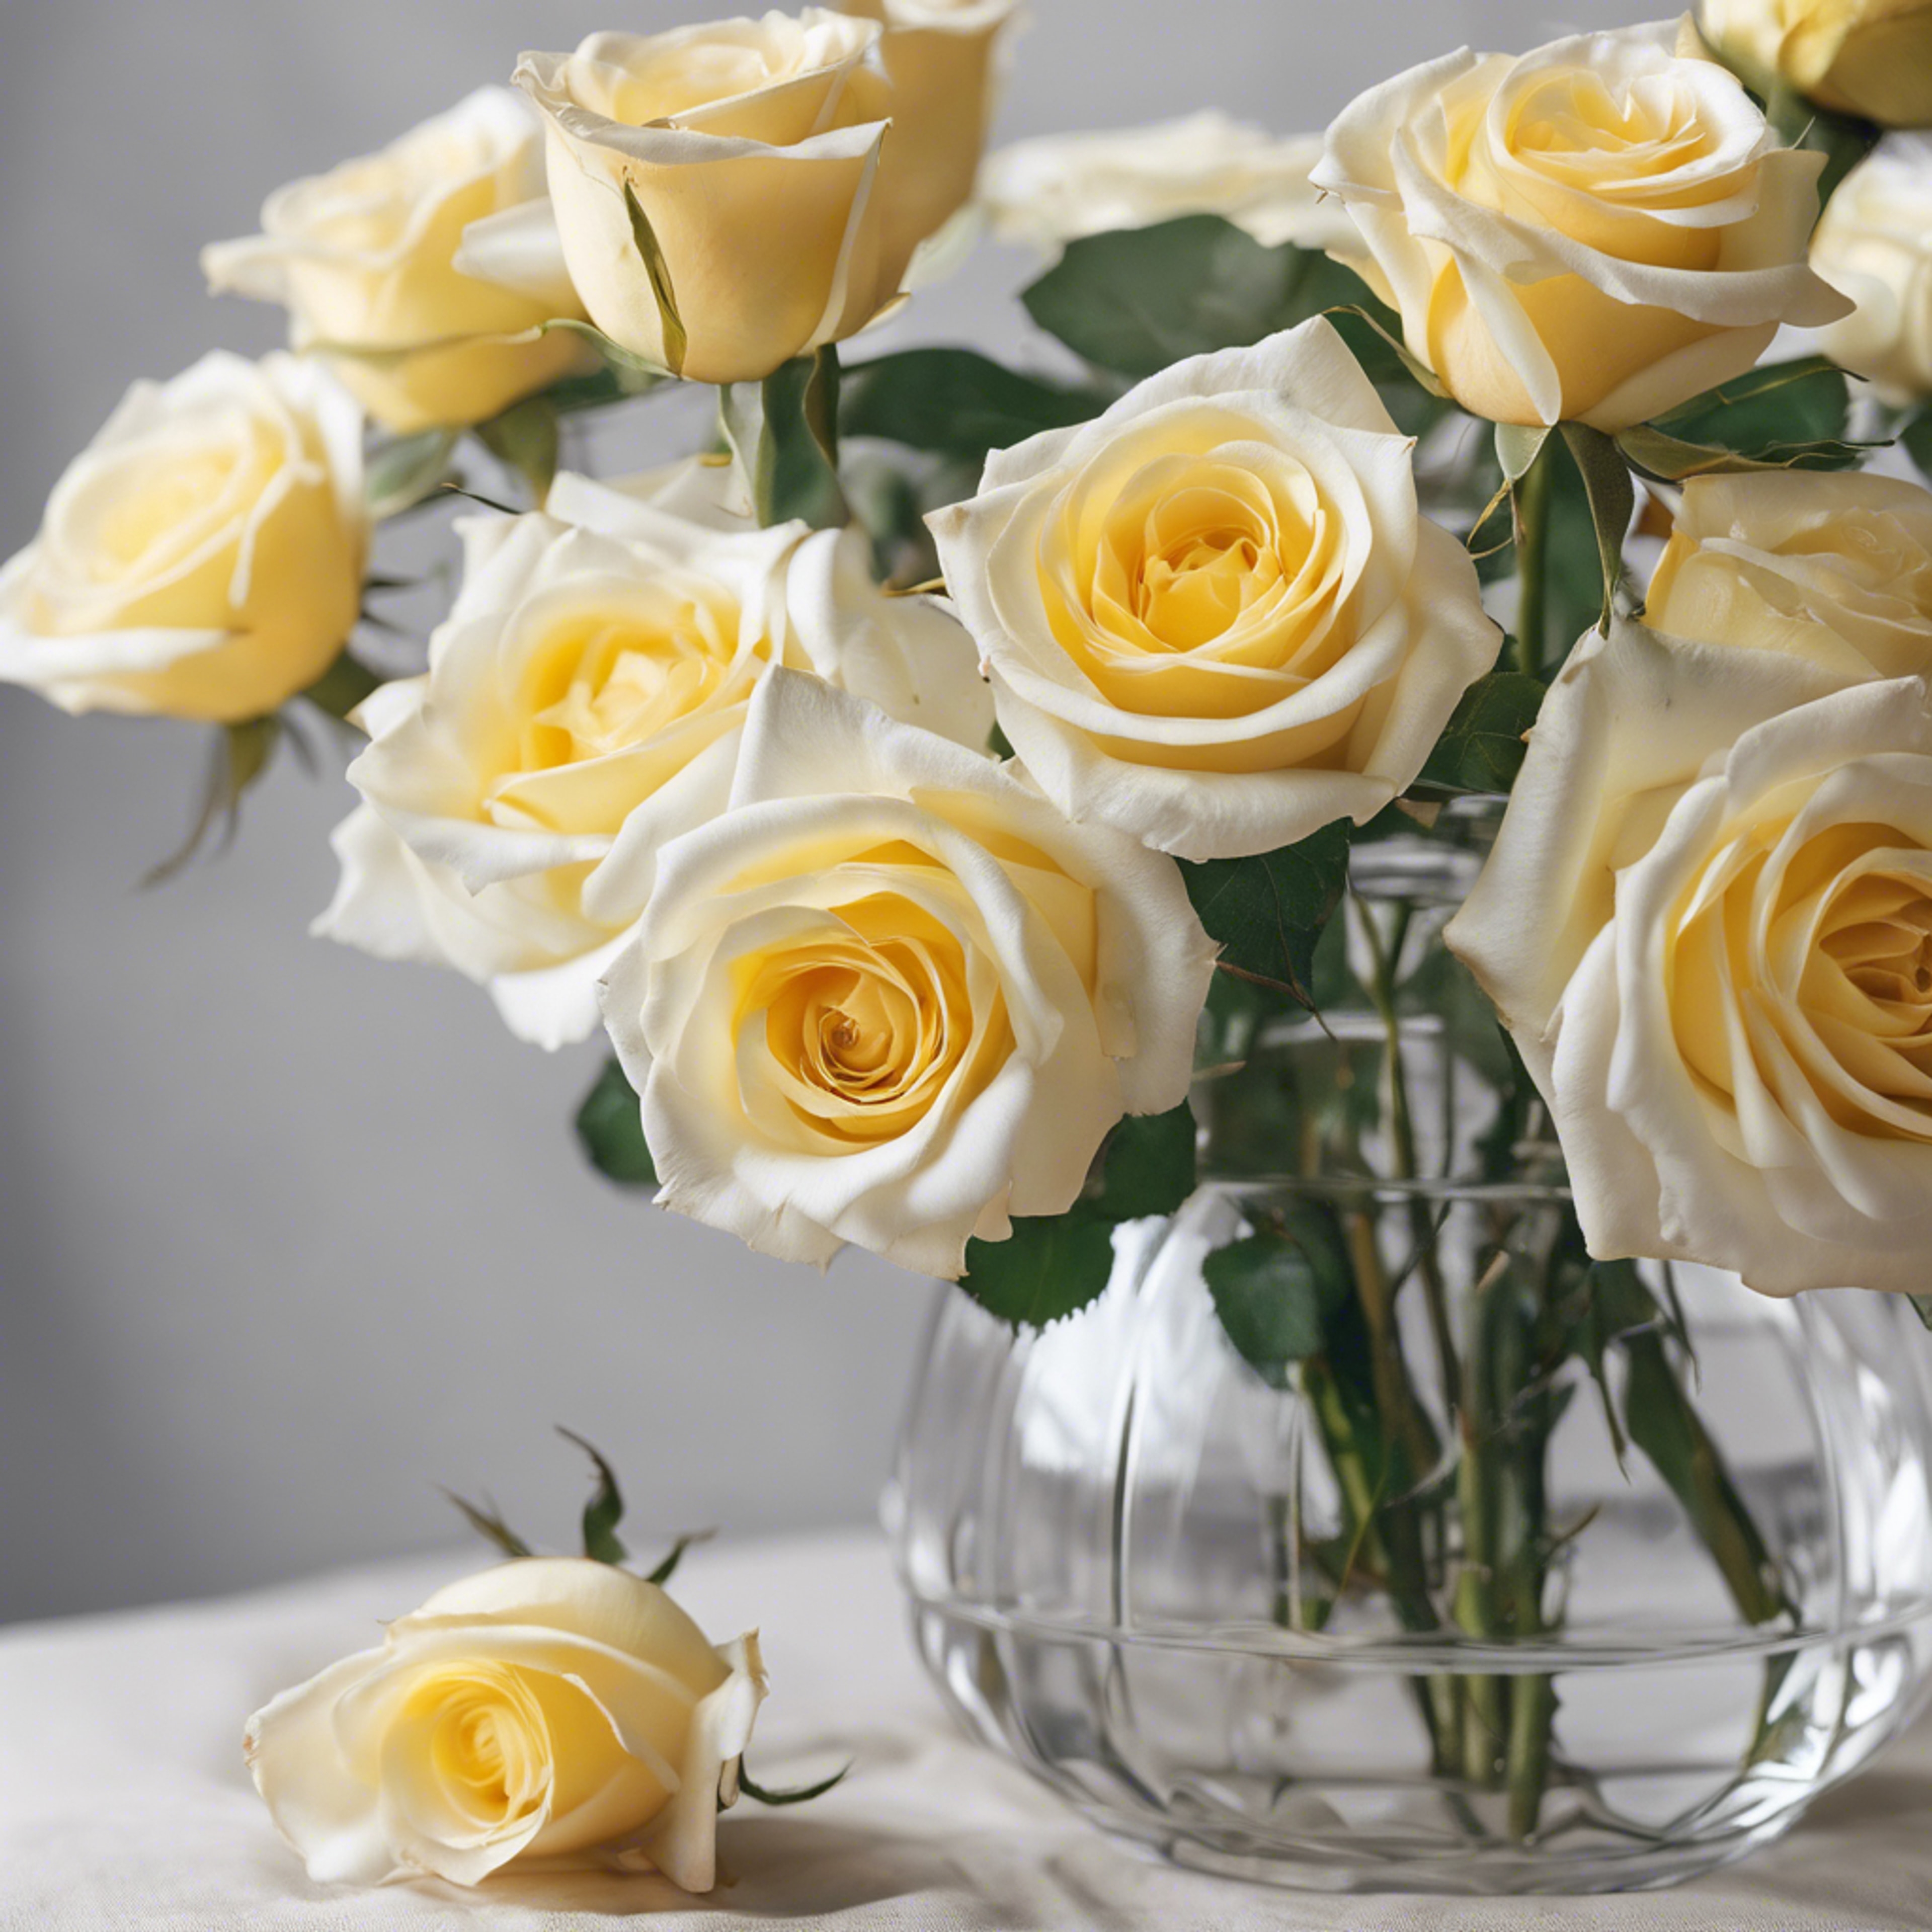 A beautiful array of luminescent white and yellow roses in a crystal clear vase. Wallpaper[29c0e485a0b1412795b9]